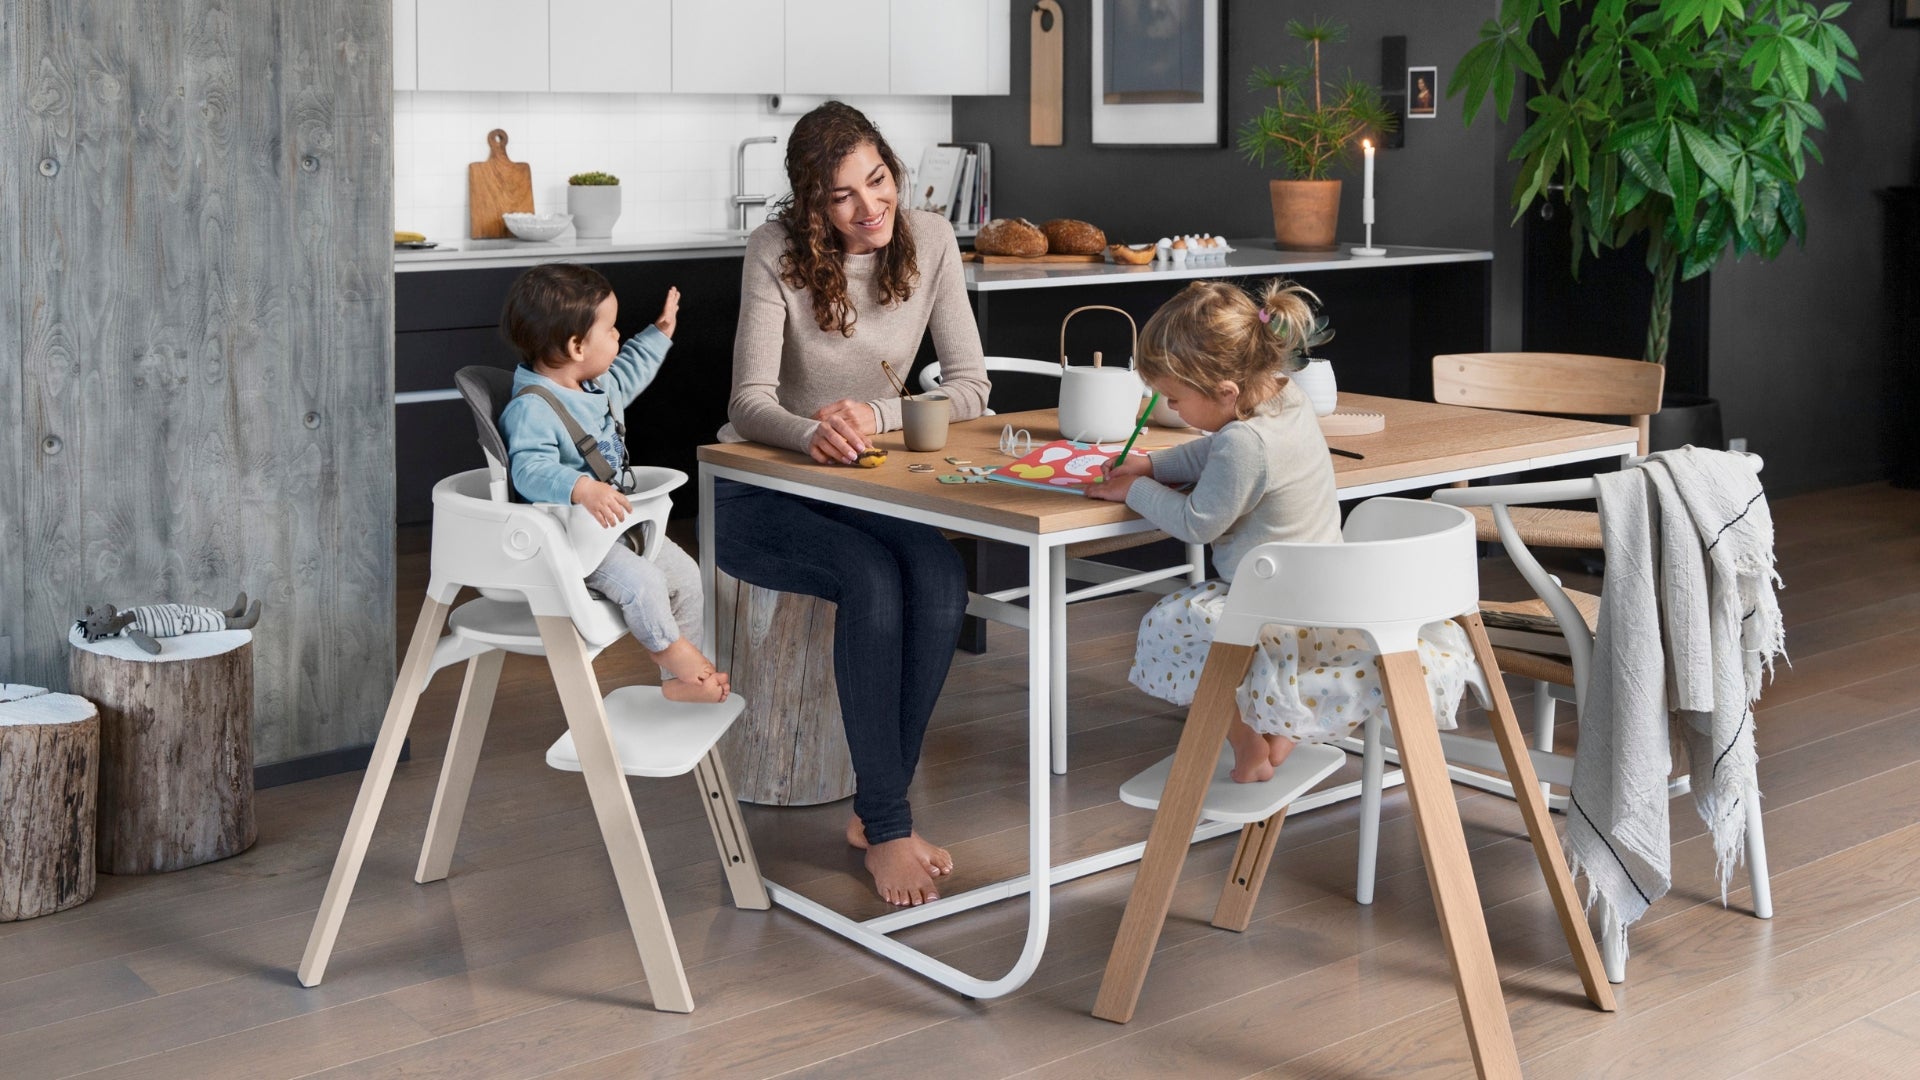 Two children in Stokke Steps chairs around a table